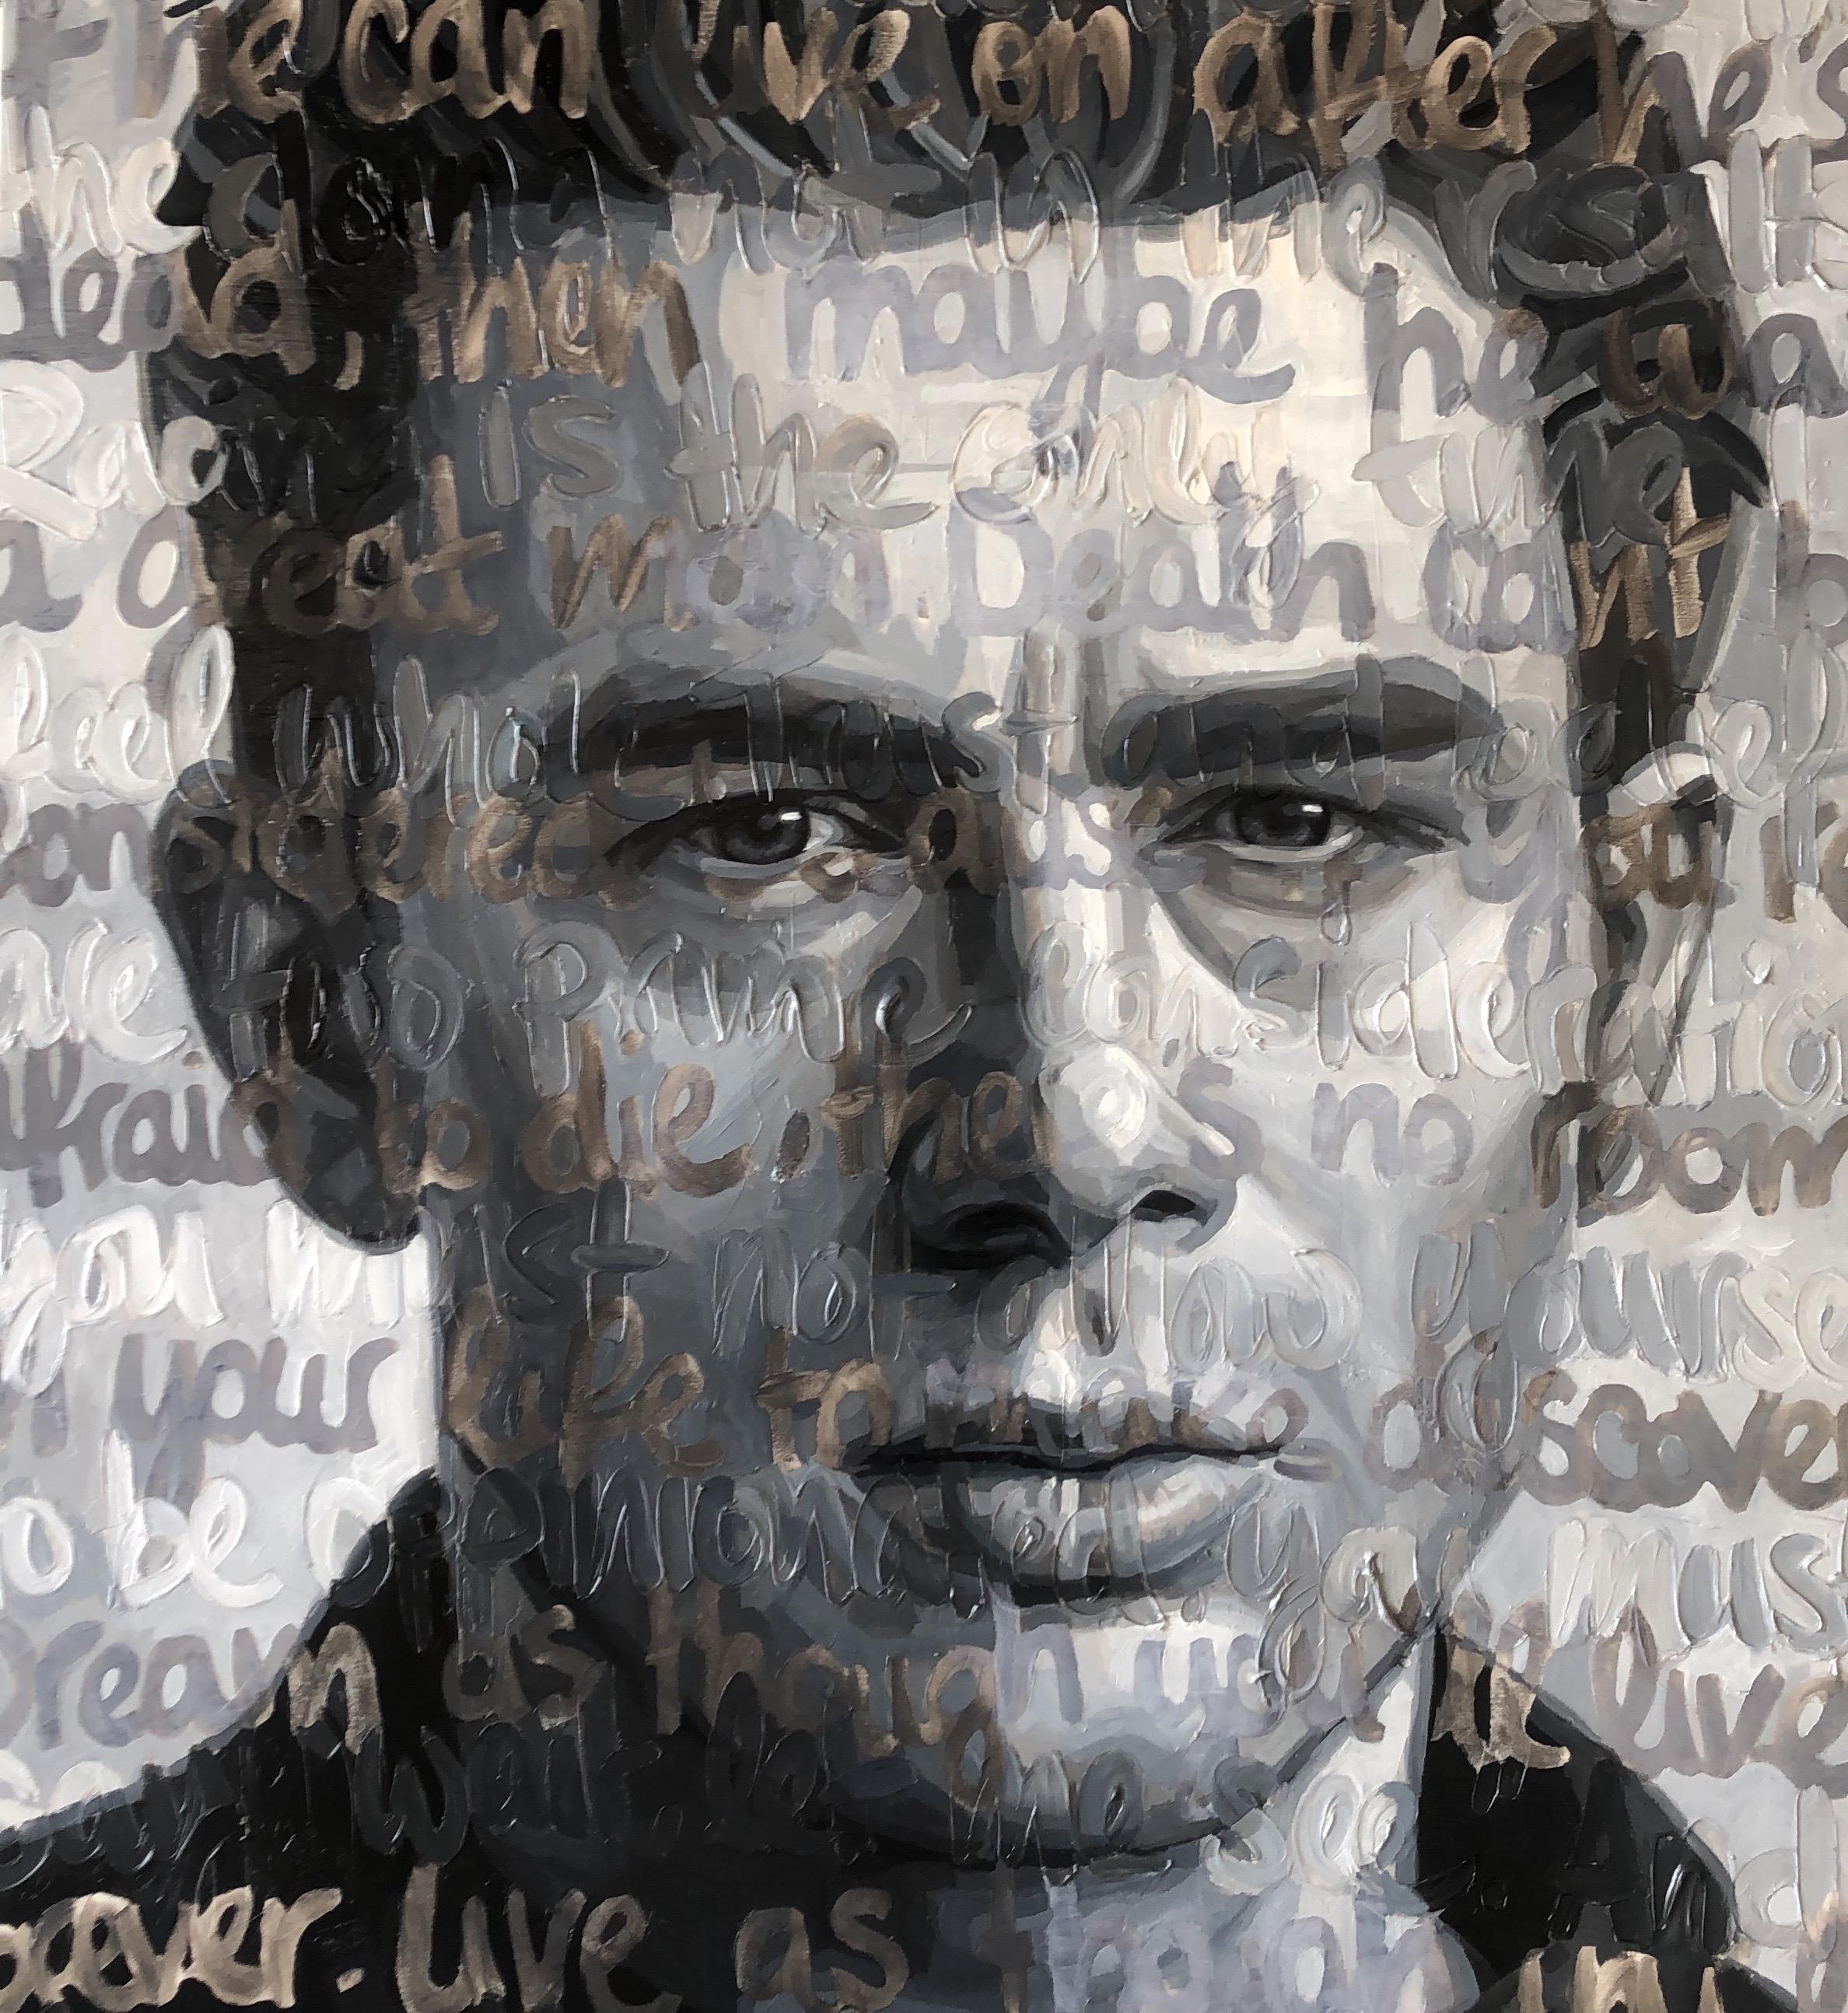 Christina Major Figurative Painting - Original Oil On Canvas Painting Titled: James Dean